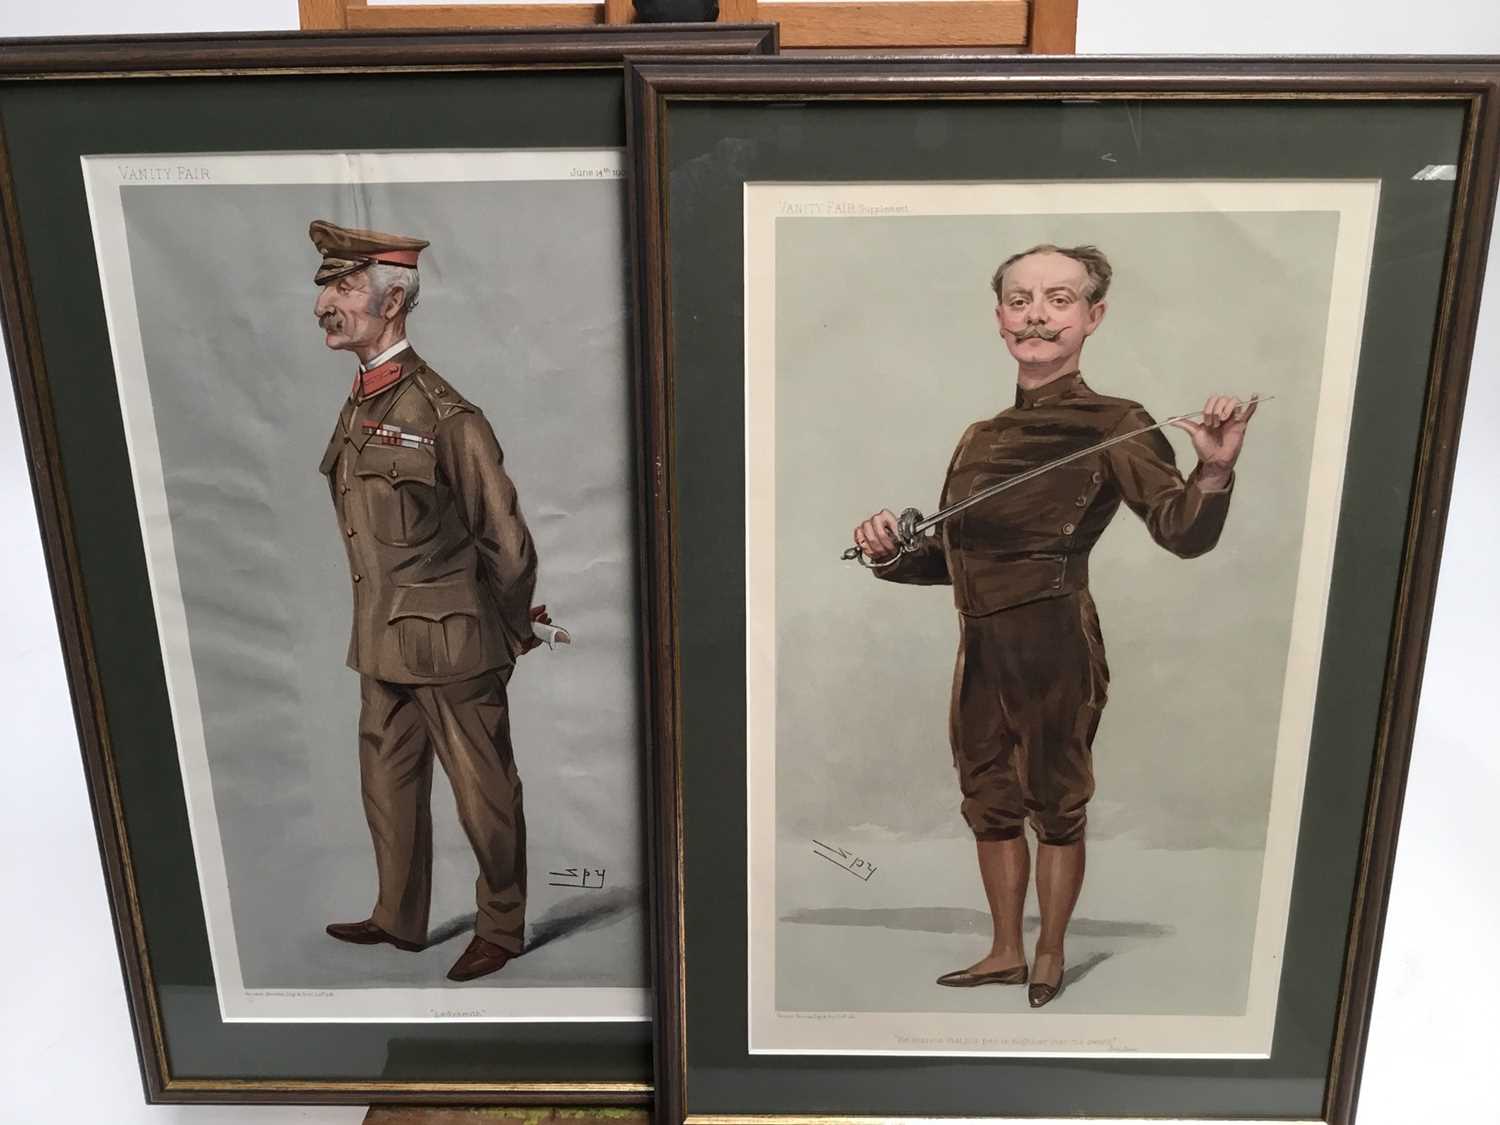 Lot 28 - Two late Victorian Vanity Fair Spy prints, "Ladysmith" and "He insists that his pen is mightier than his sword", in glazed frames